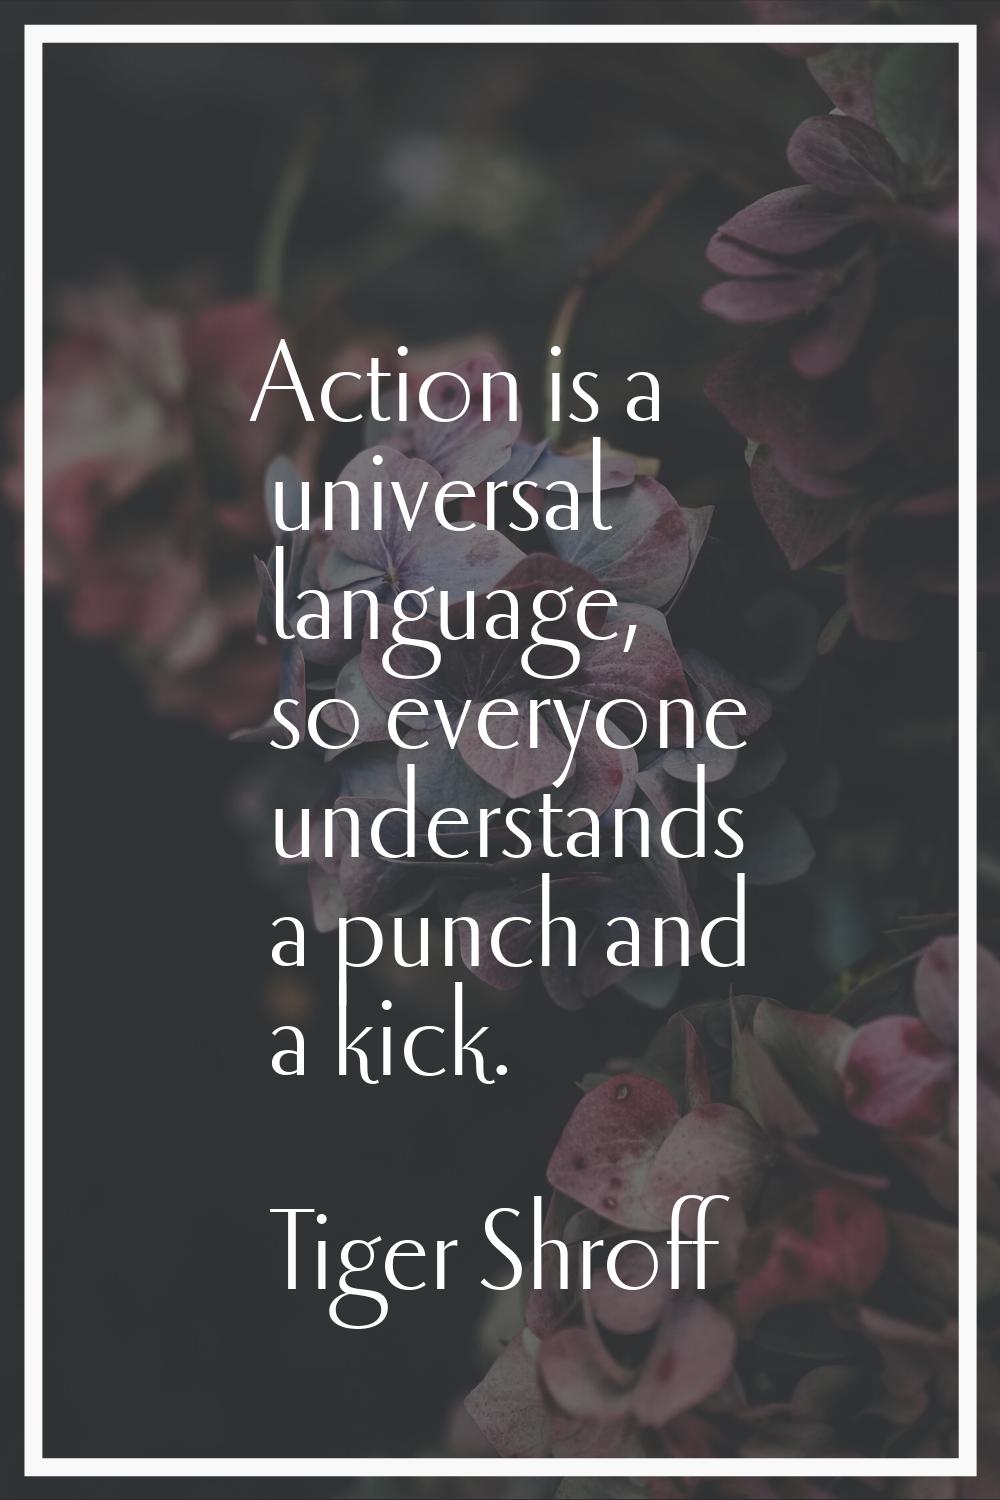 Action is a universal language, so everyone understands a punch and a kick.